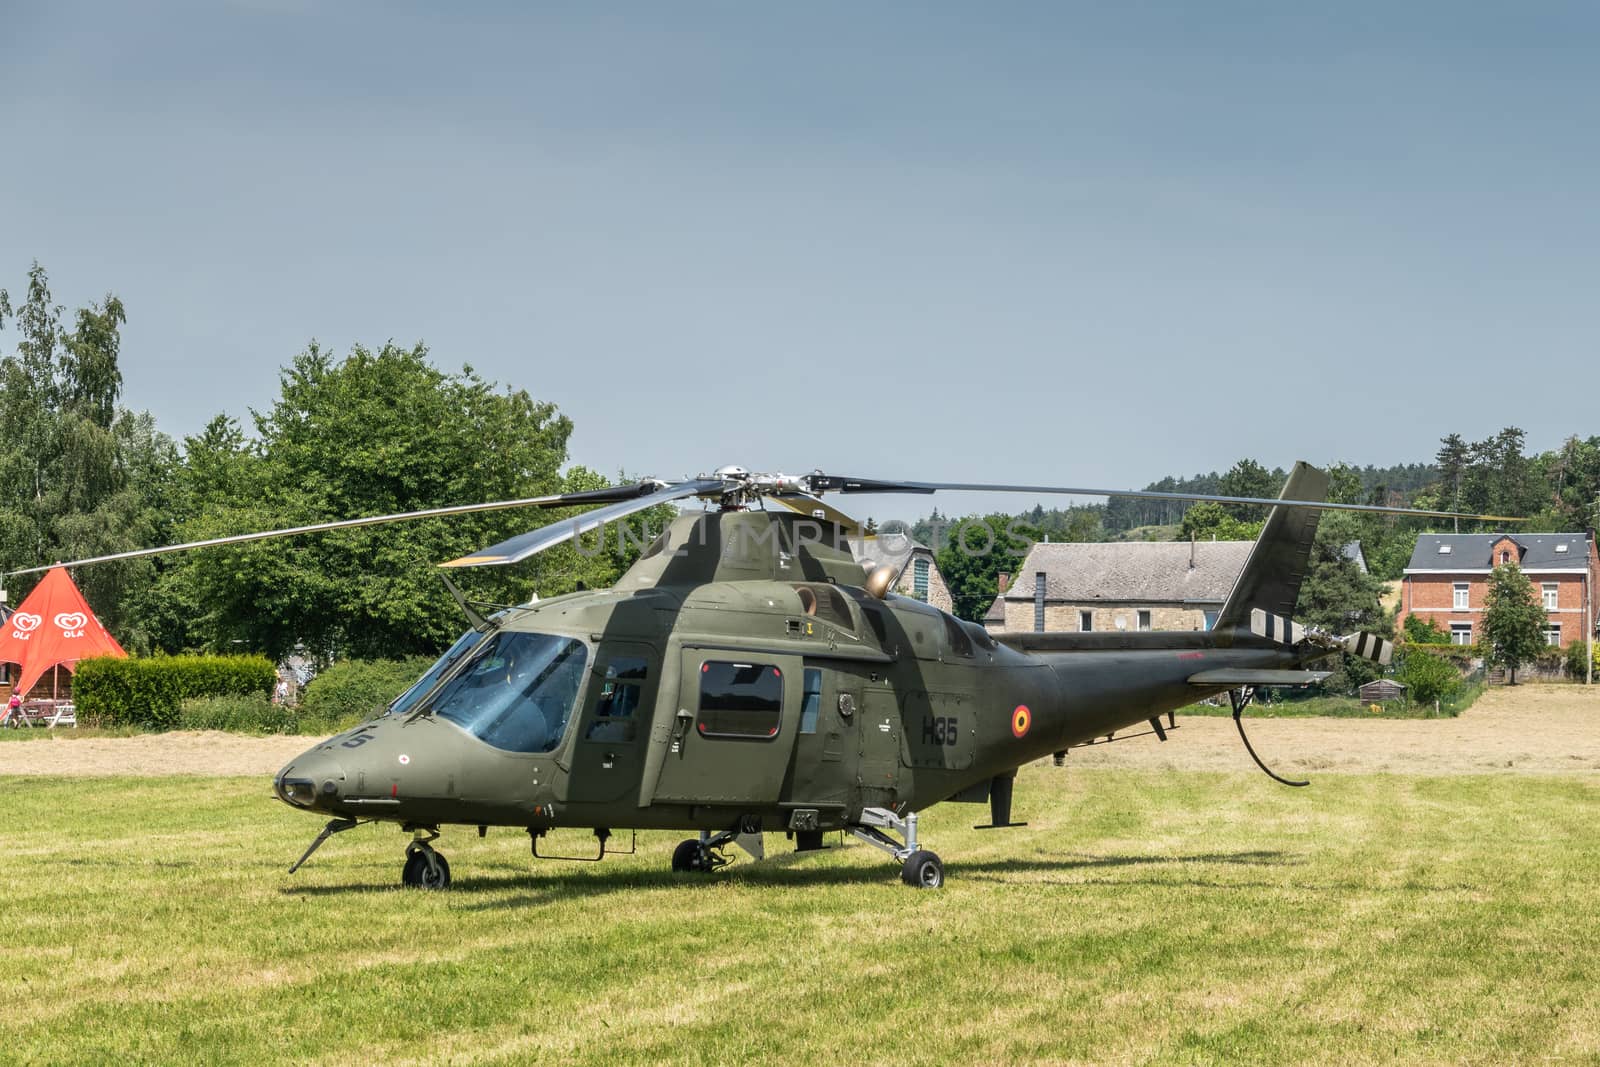 Han-sur-Lesse, Belgium - June 25, 2019: Belgian army green helicopter set on green lawn against foliage and a few houses under blue sky.